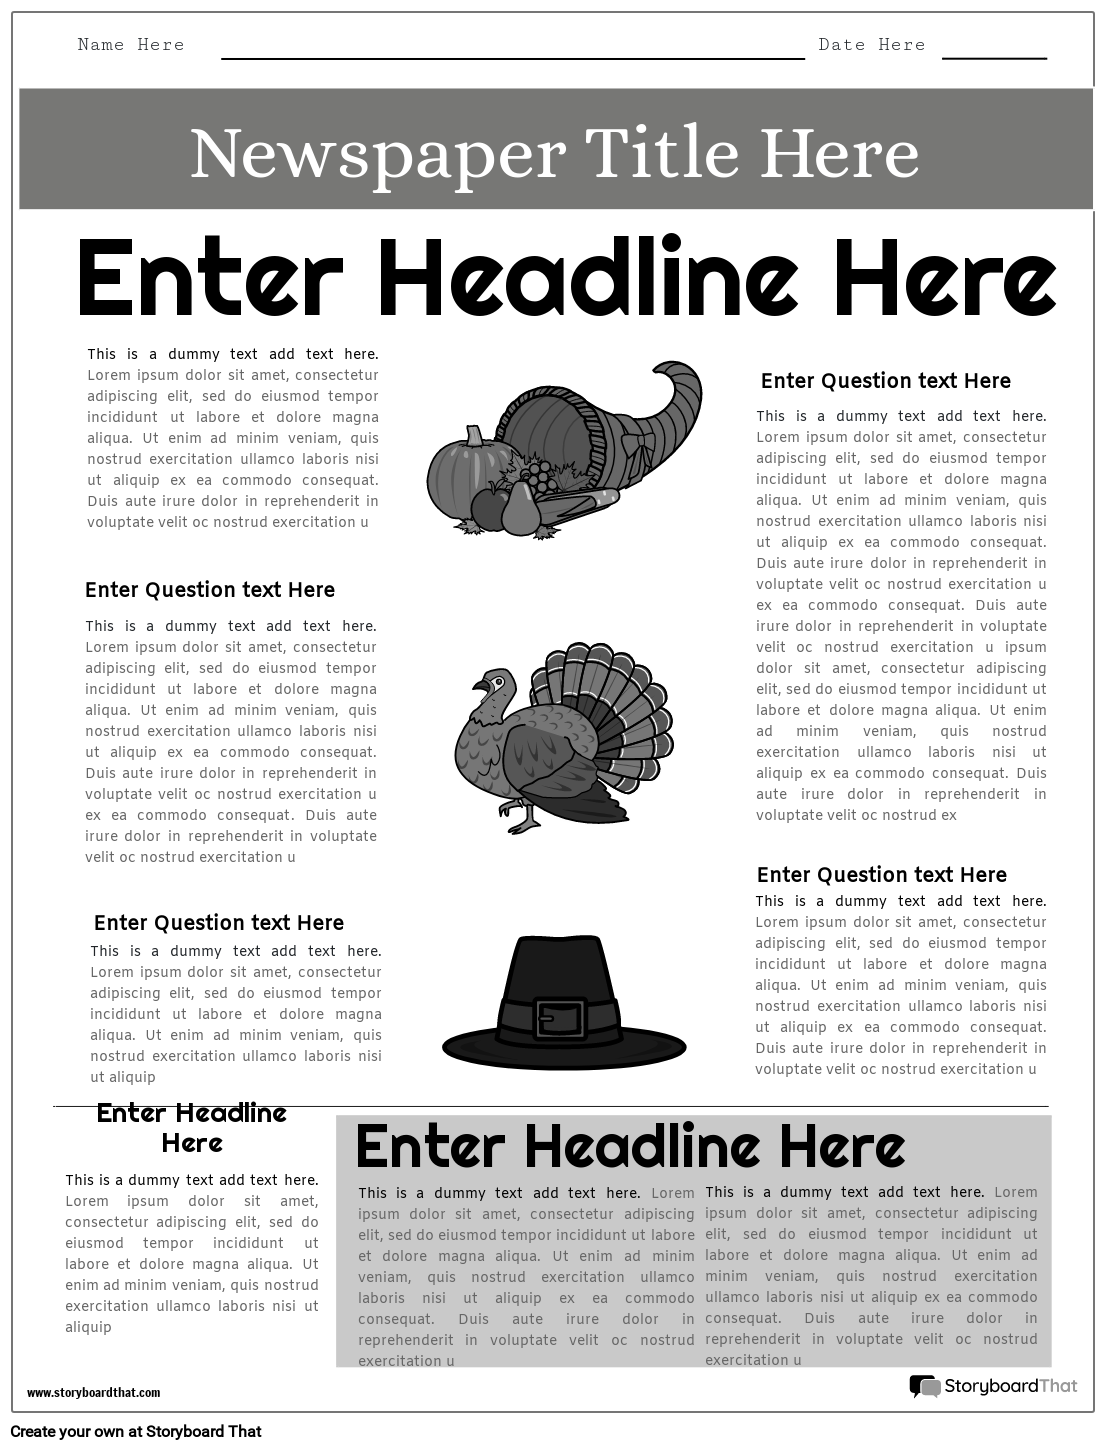 Objects in Middle Newspaper Project Template